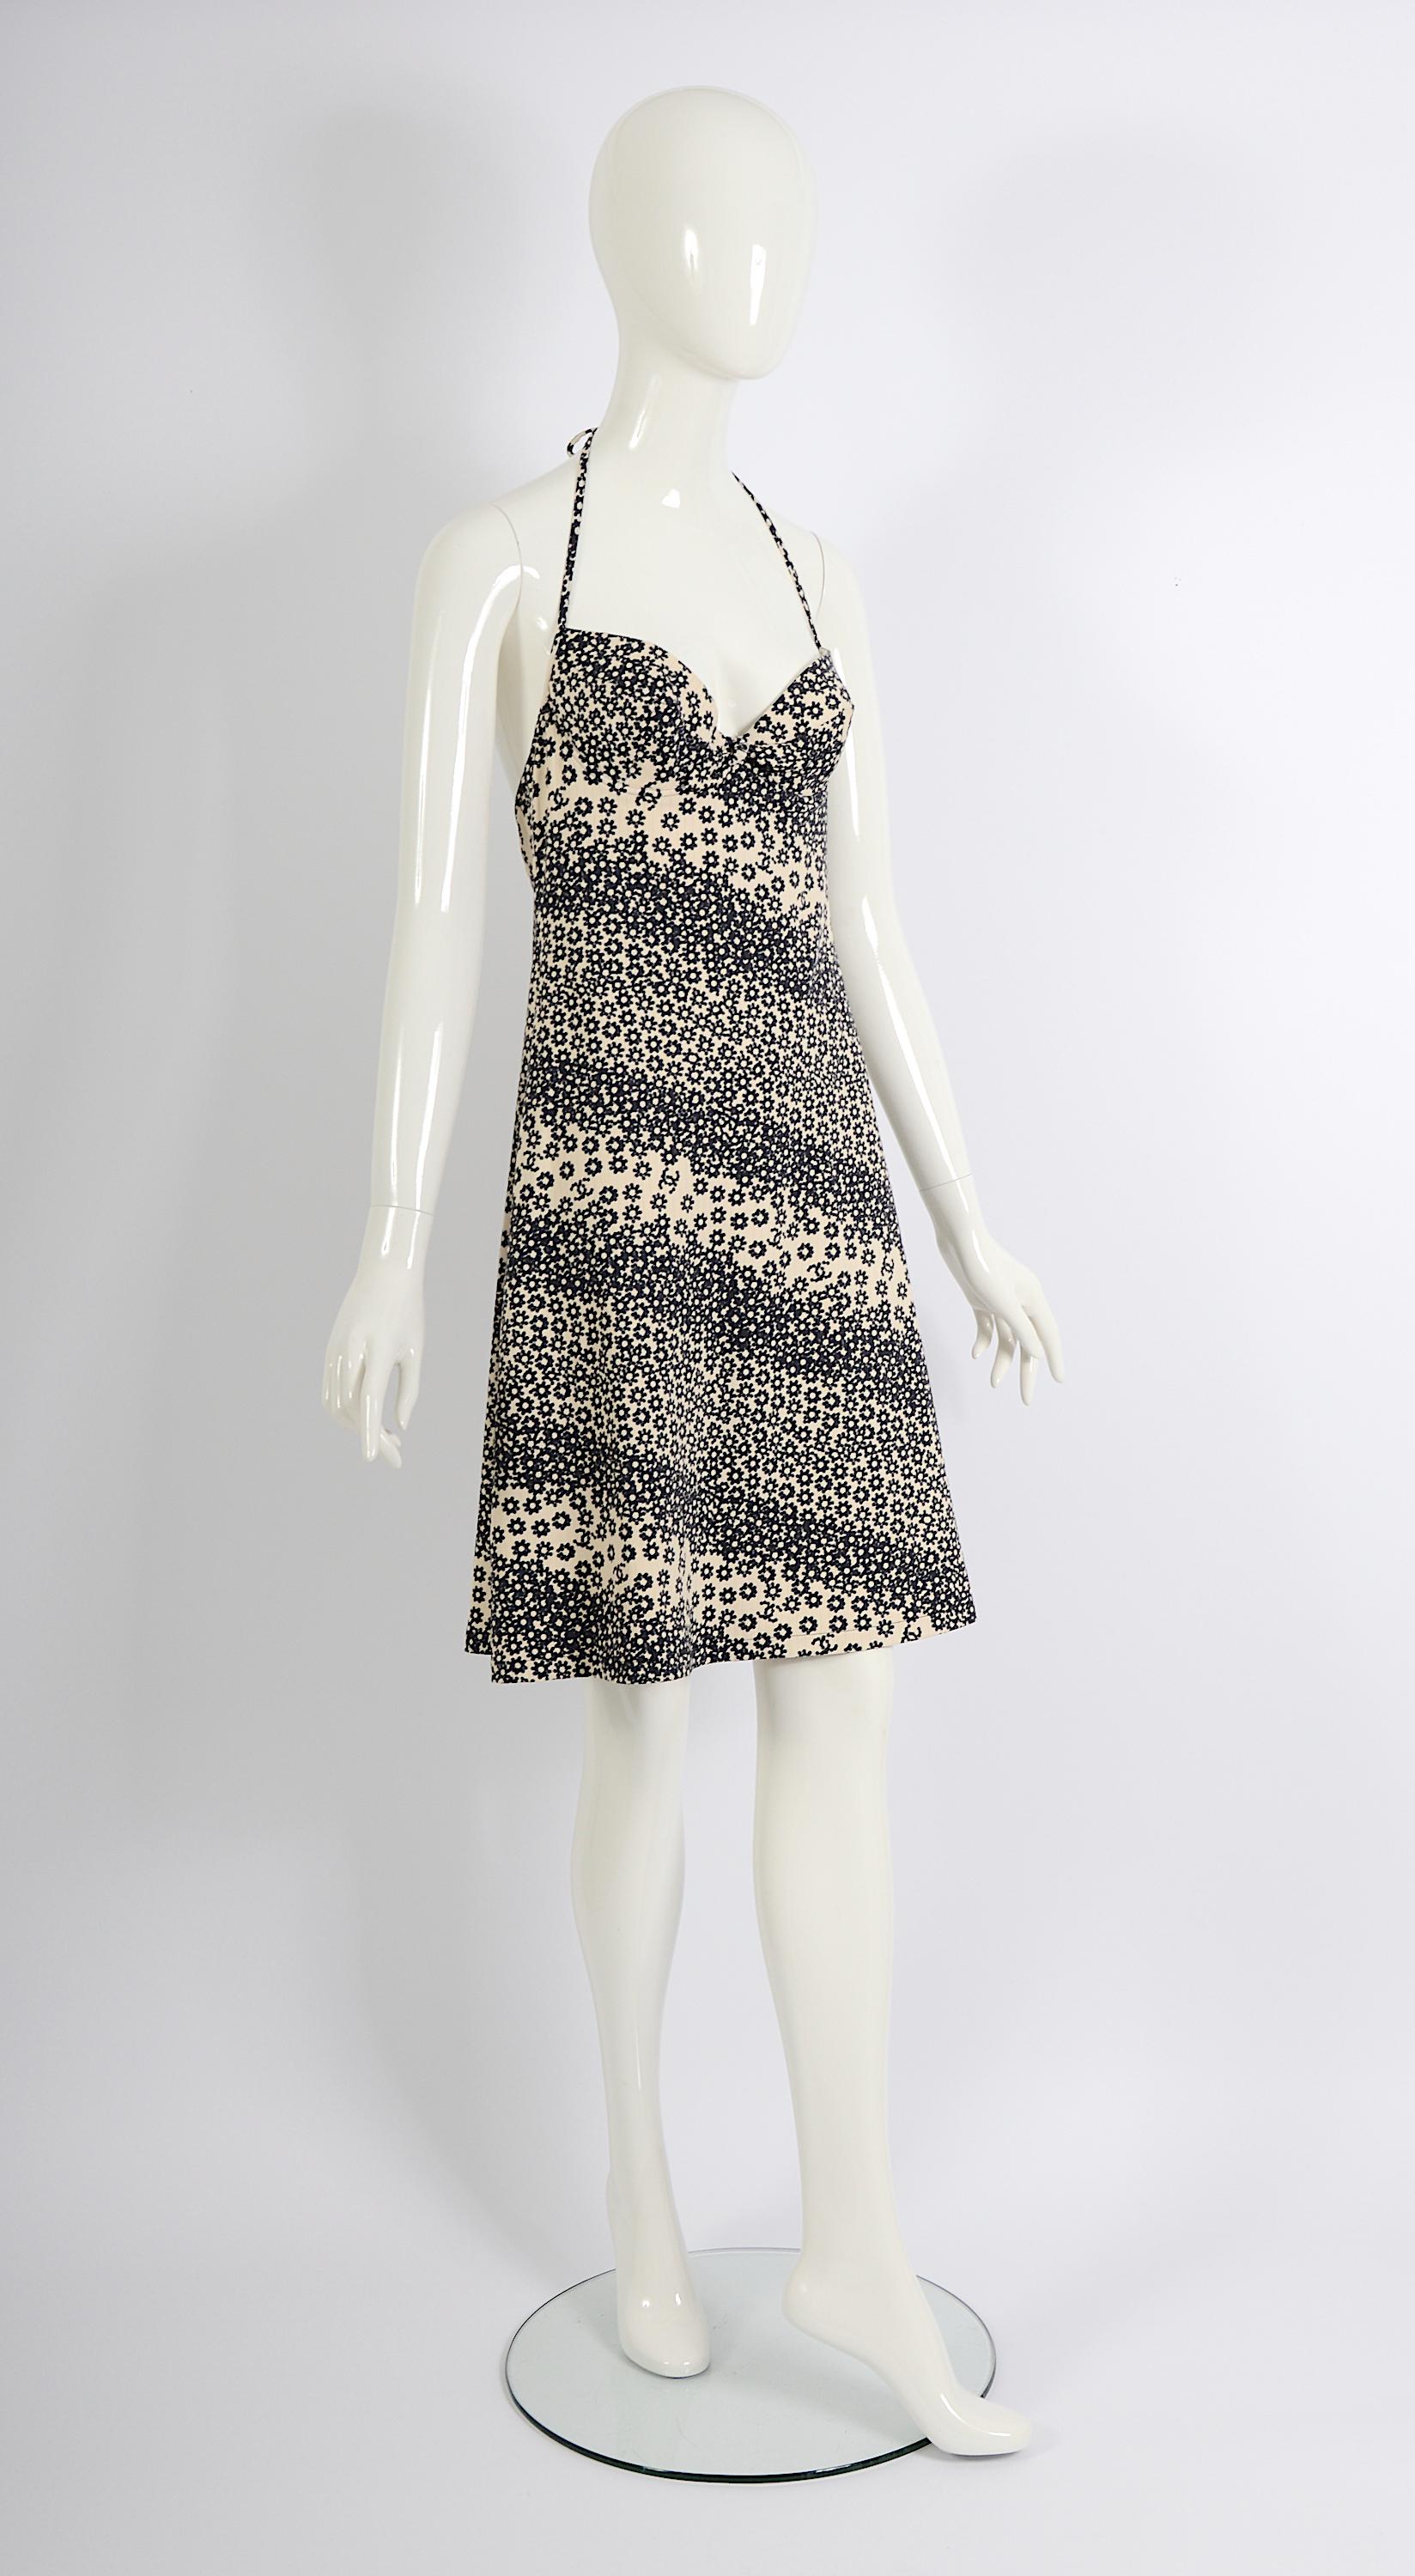 Chanel by Karl Lagerfeld black & white logo flower print halter dress, ss 2003 In Excellent Condition For Sale In Antwerpen, Vlaams Gewest